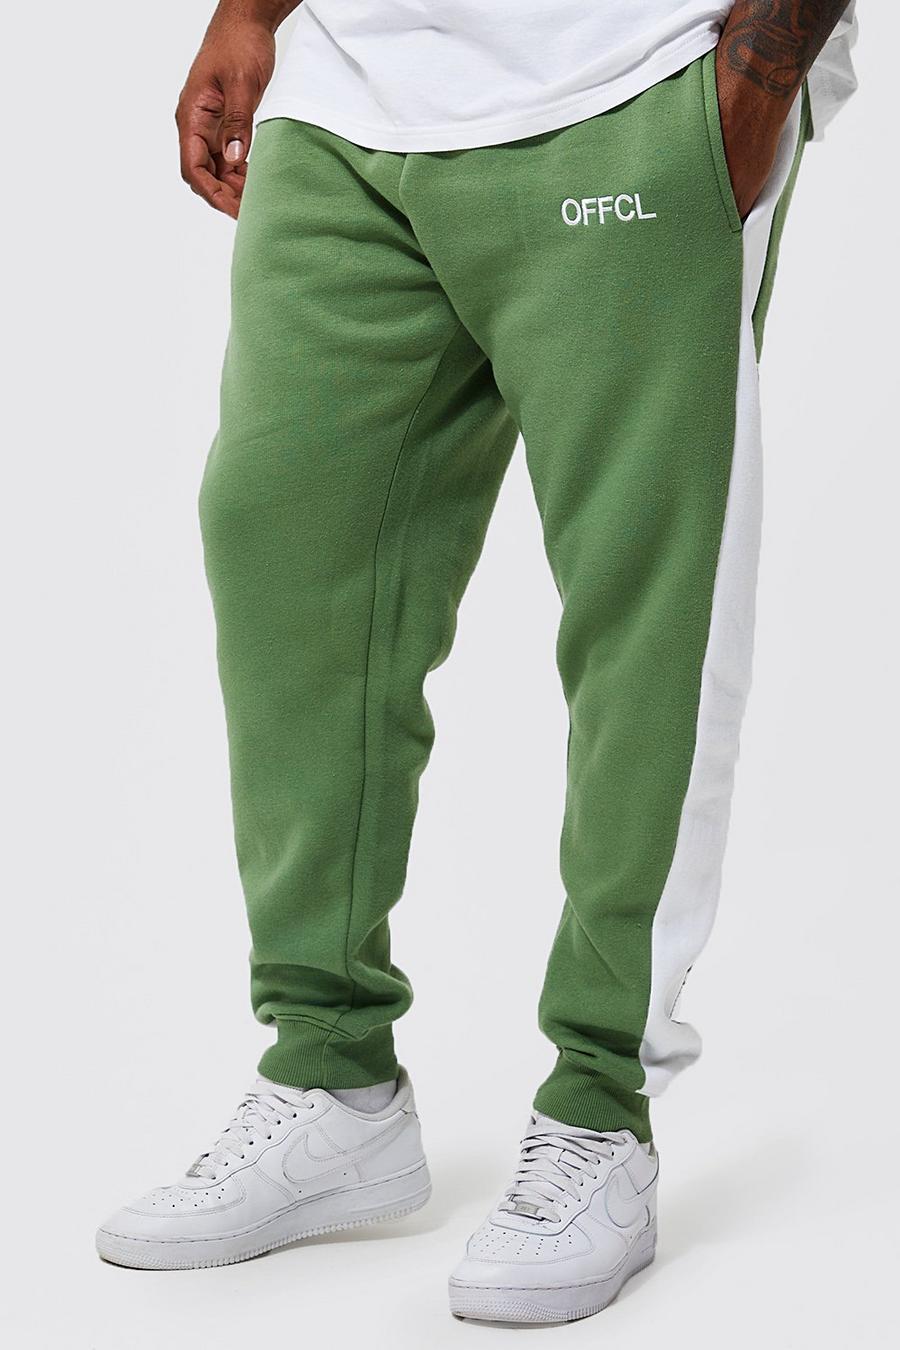 Sage green Plus Offcl Skinny Side Panel Jogger